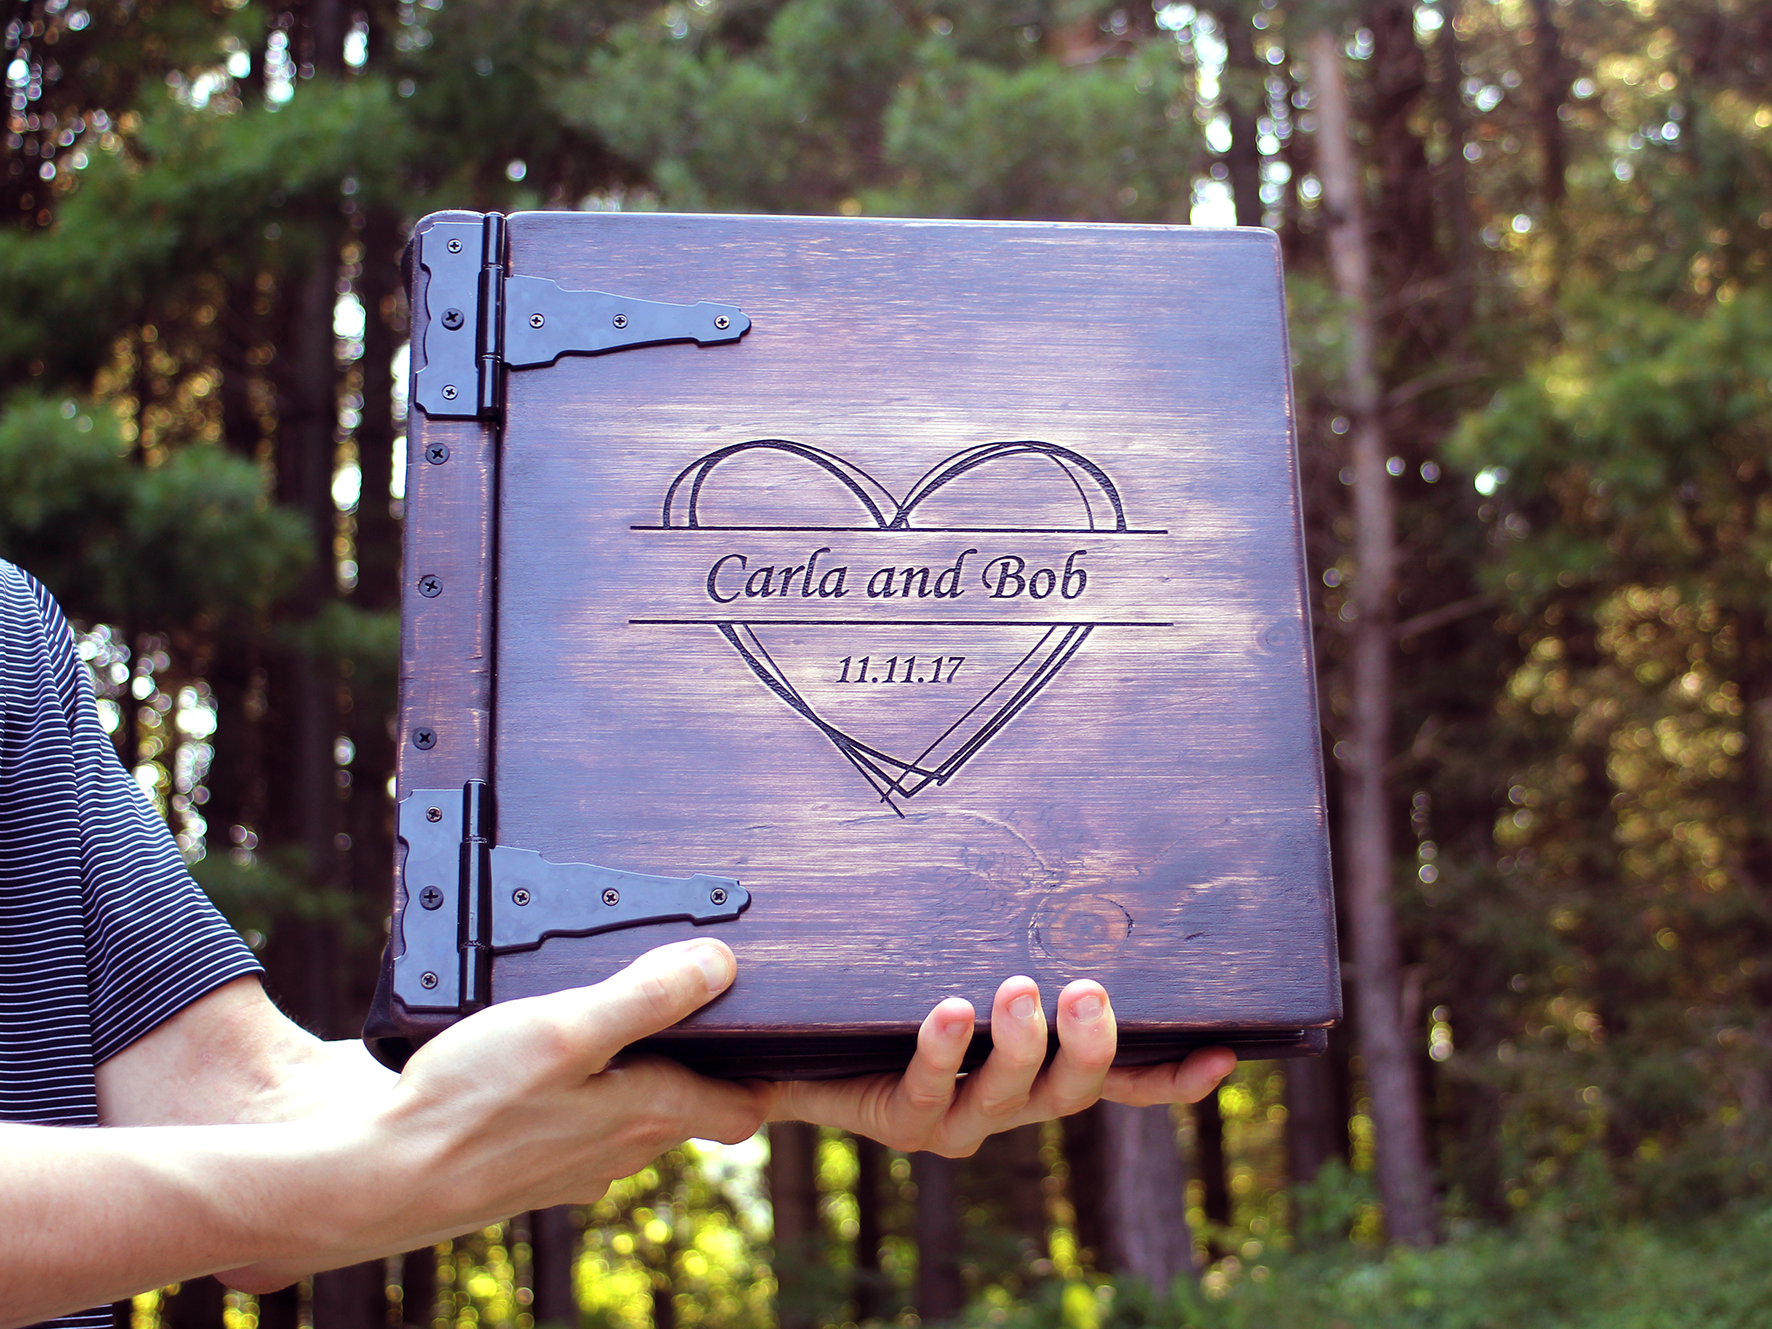 Personalized wooden book with engraved text and image, showcasing the unique and special way to capture life's moments by Rustic Engravings